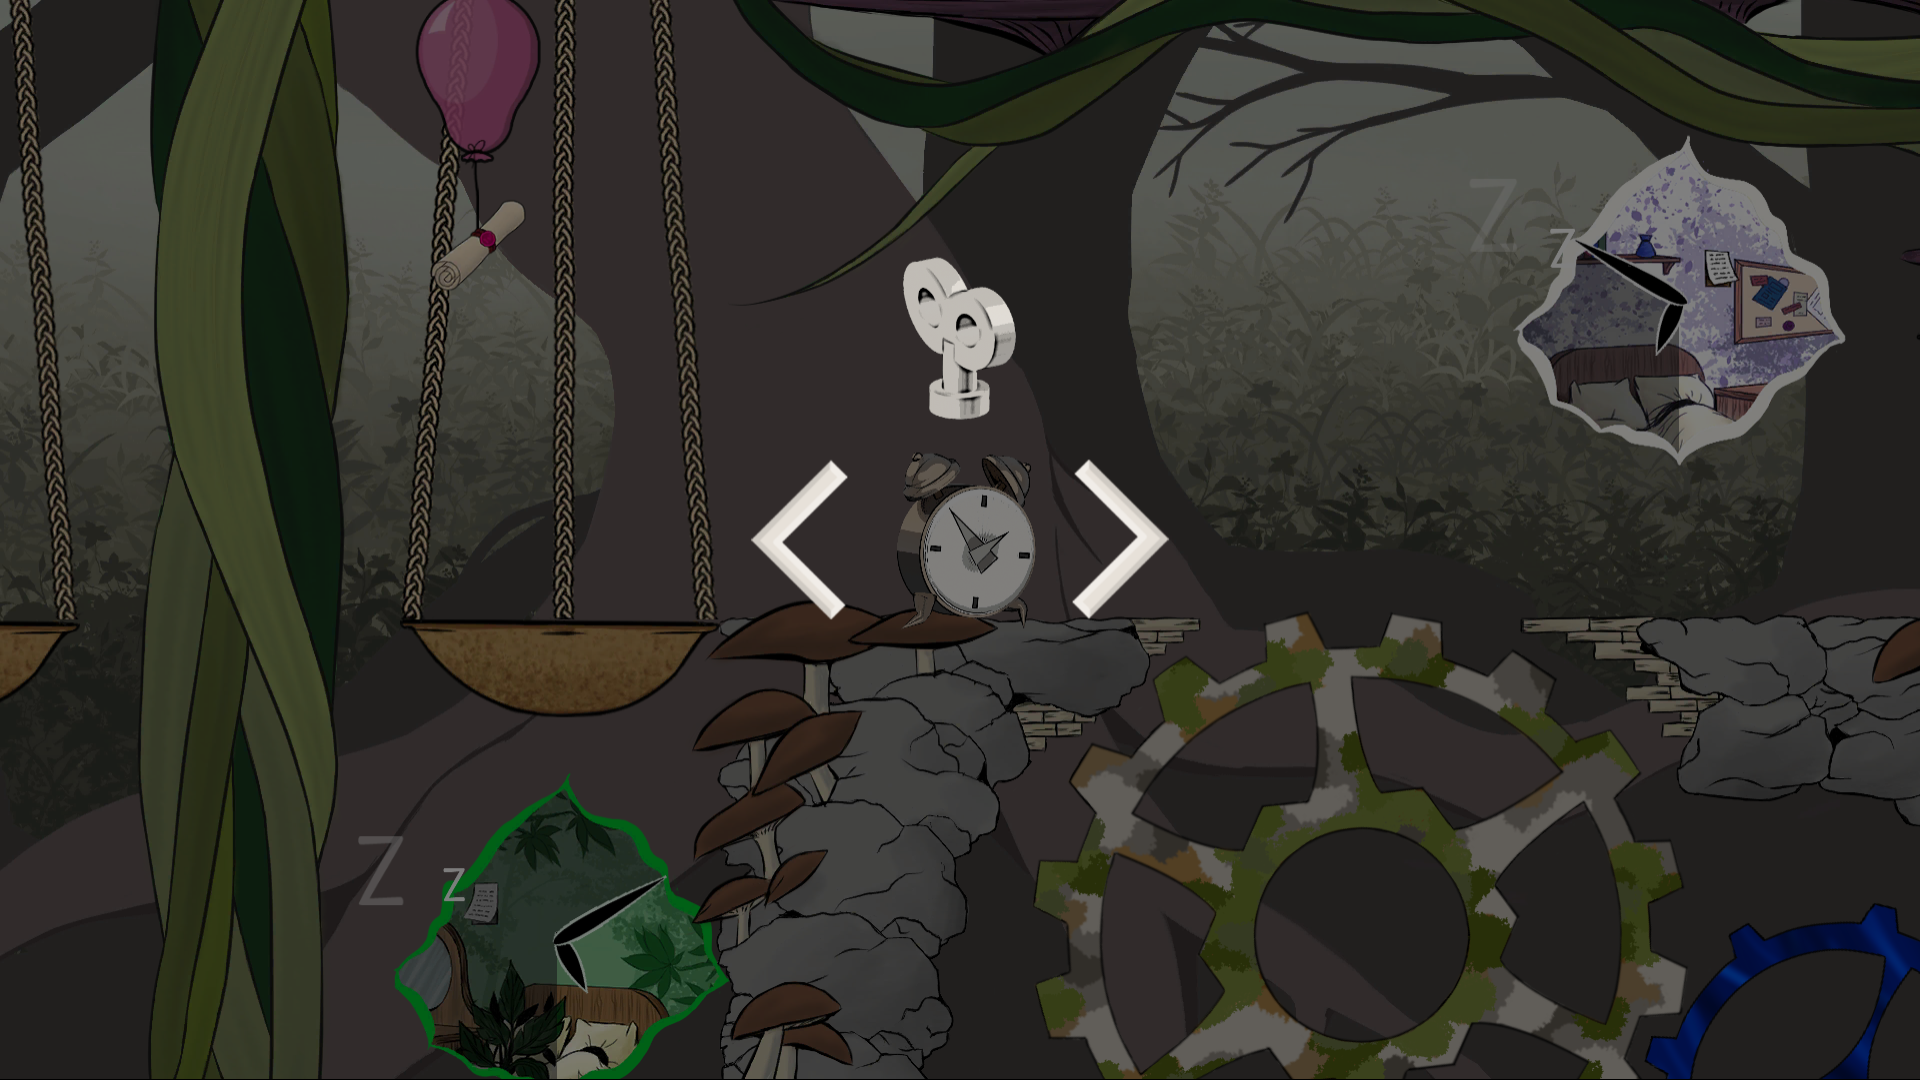 Screenshot of the game WAKE. It shows a level with a dark forest setting from a 2D side-scrolling perspective. At the center of the screen is an alarm clock that is being wound up. There is a wind-up key above it and arrows point to the left and right. On its right side there are two gears and a white window. On its left side there is a giant scale, a green window and a pink balloon with a letter tied to it.